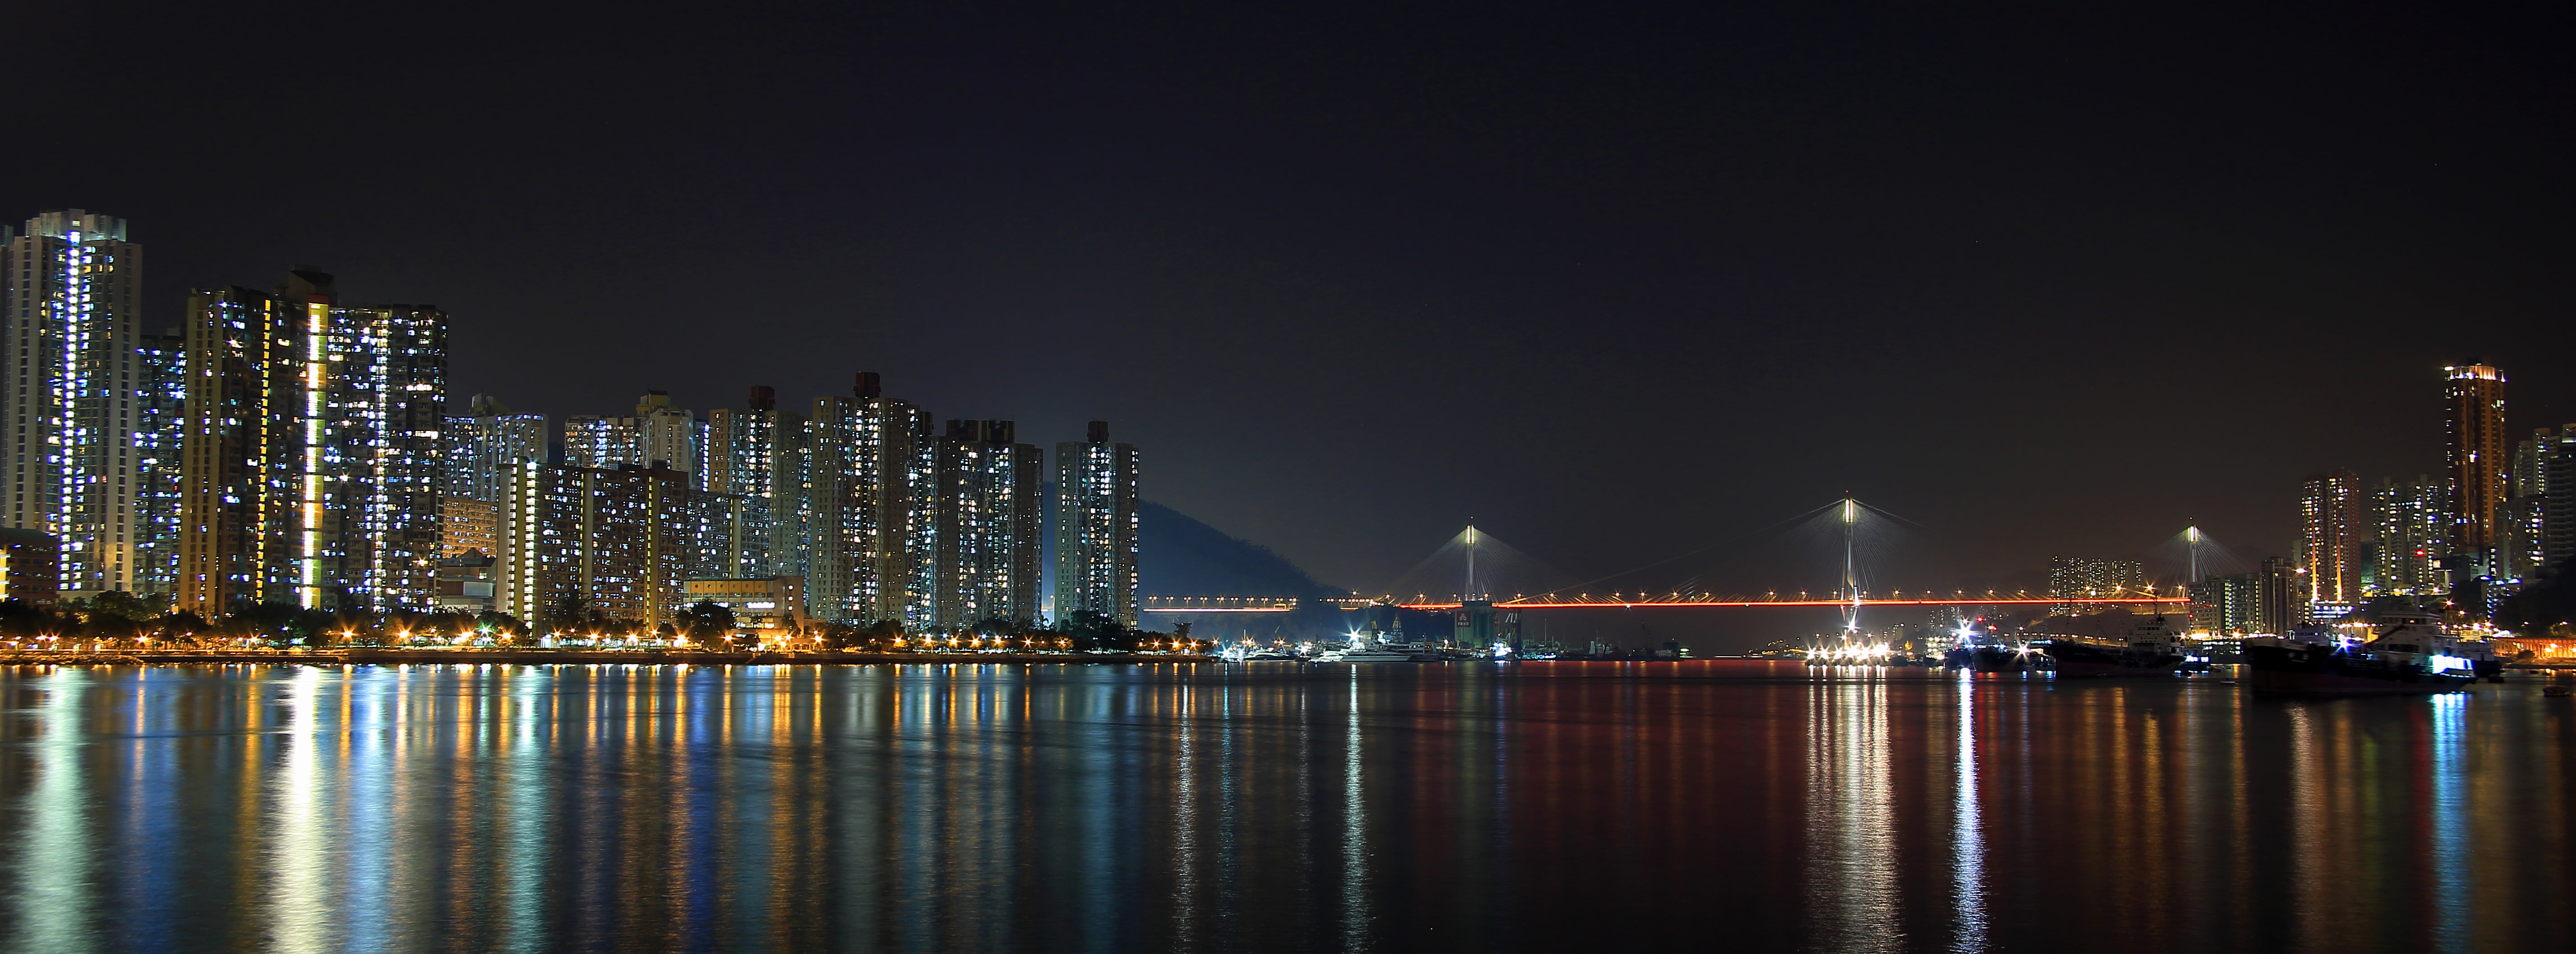 panoramic view of city during nighttime